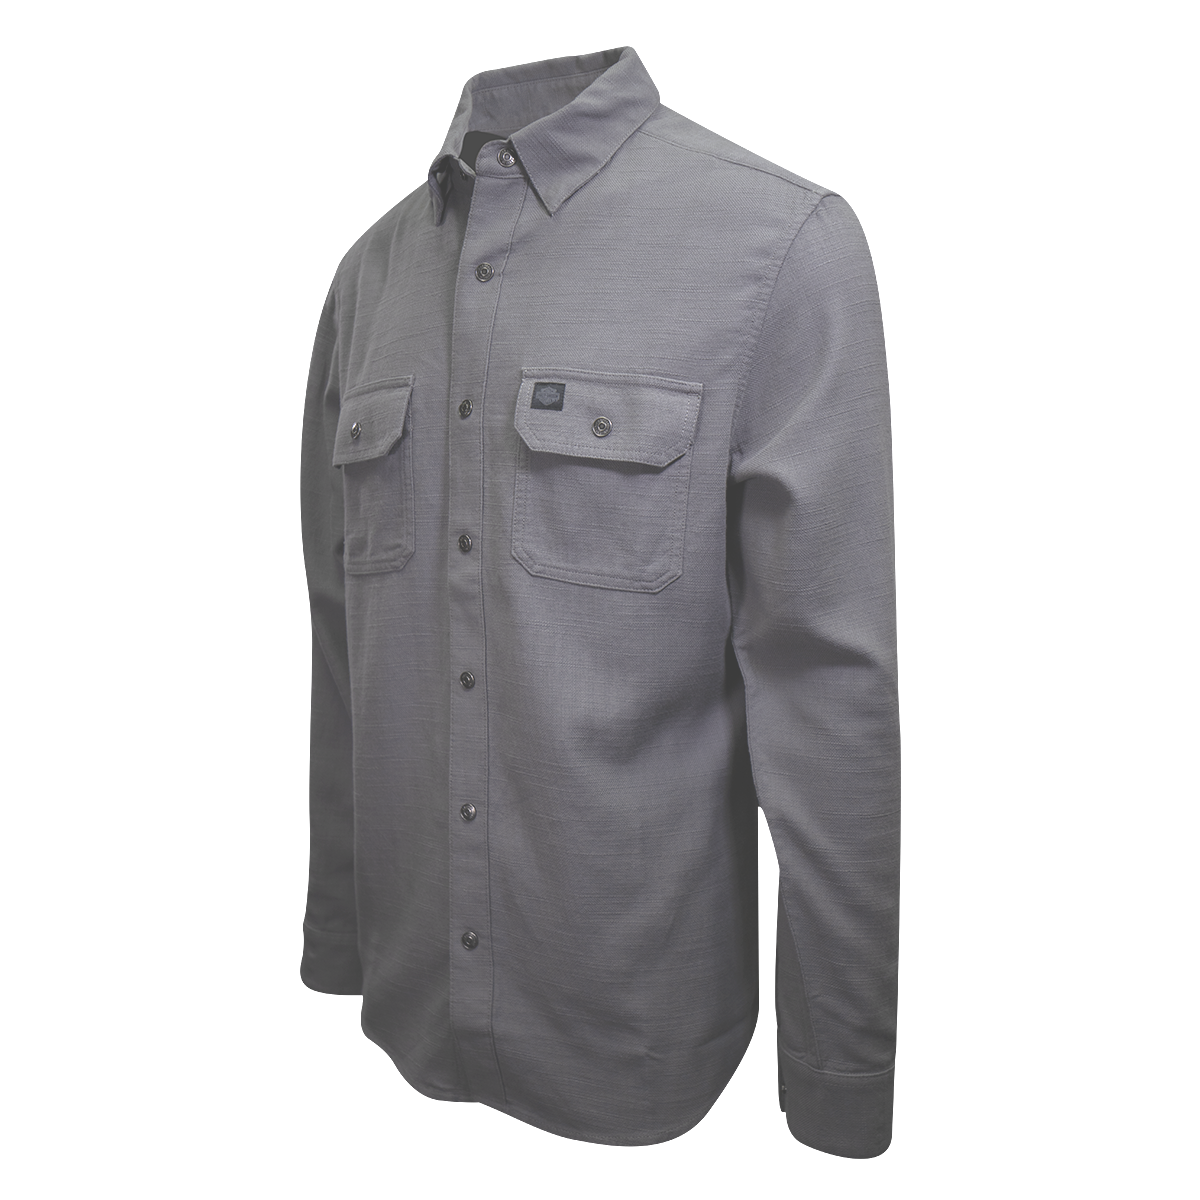 Harley-Davidson Men's Solid Grey Snap On Button L/S Woven Shirt (S10)